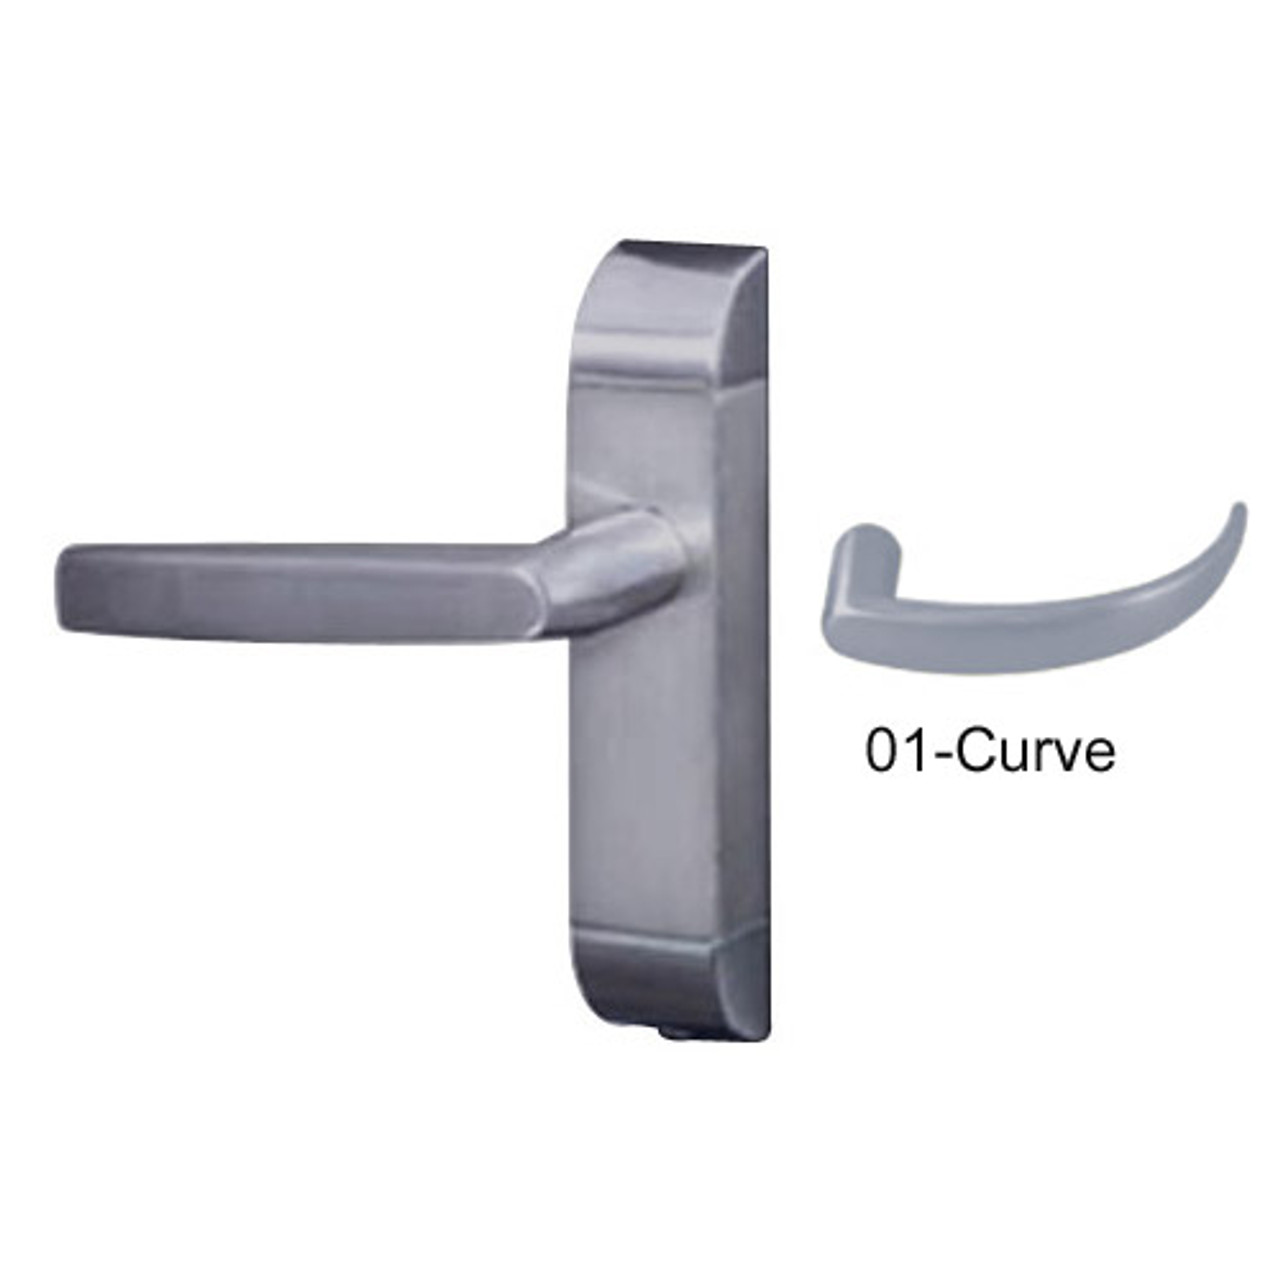 4600-01-632-US32D Adams Rite Heavy Duty Curve Deadlatch Handles in Satin Stainless Finish